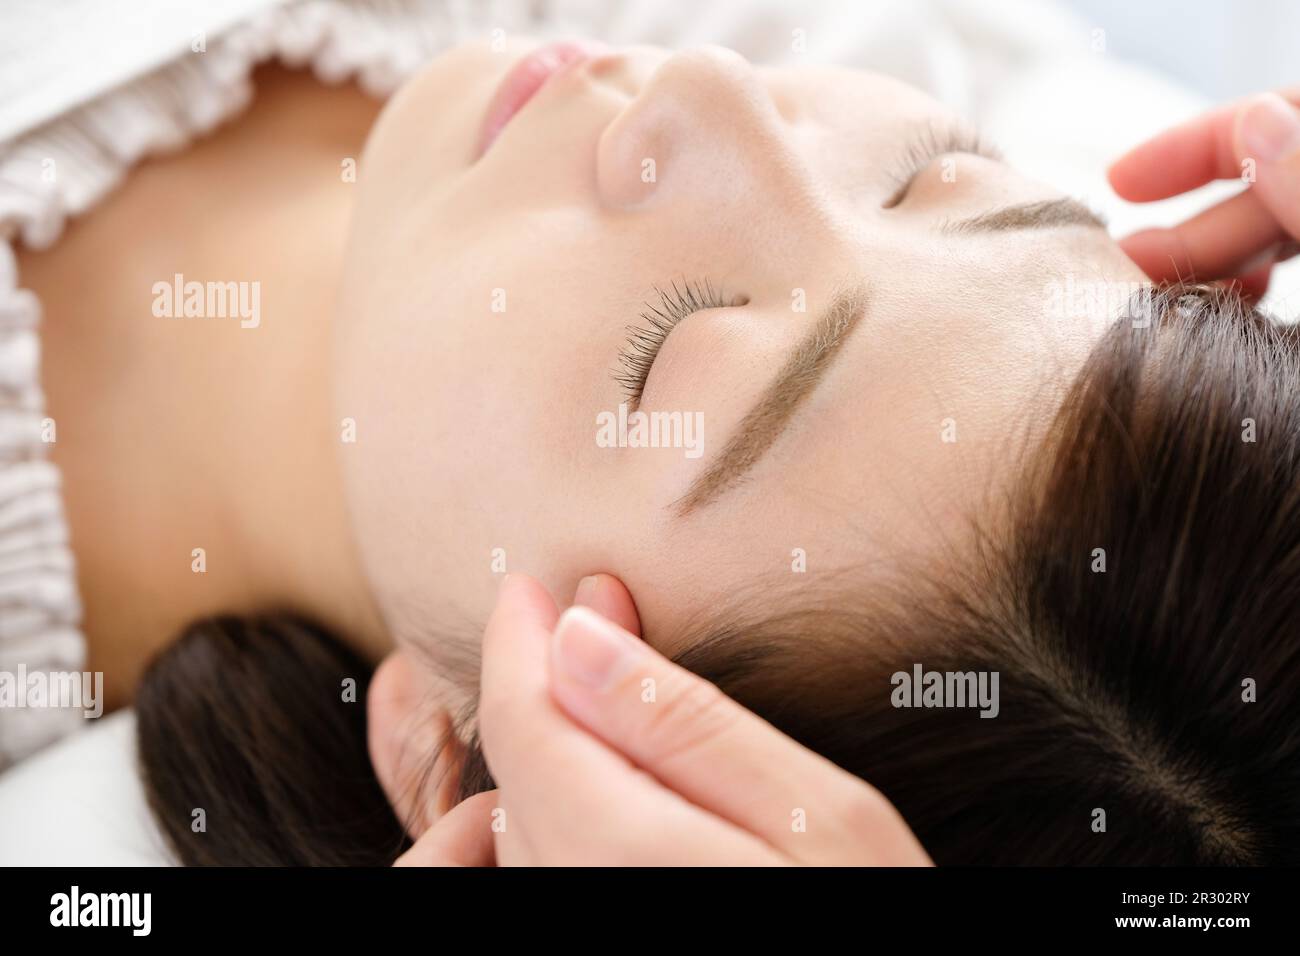 A woman receiving temple shiatsu at acupuncture Stock Photo